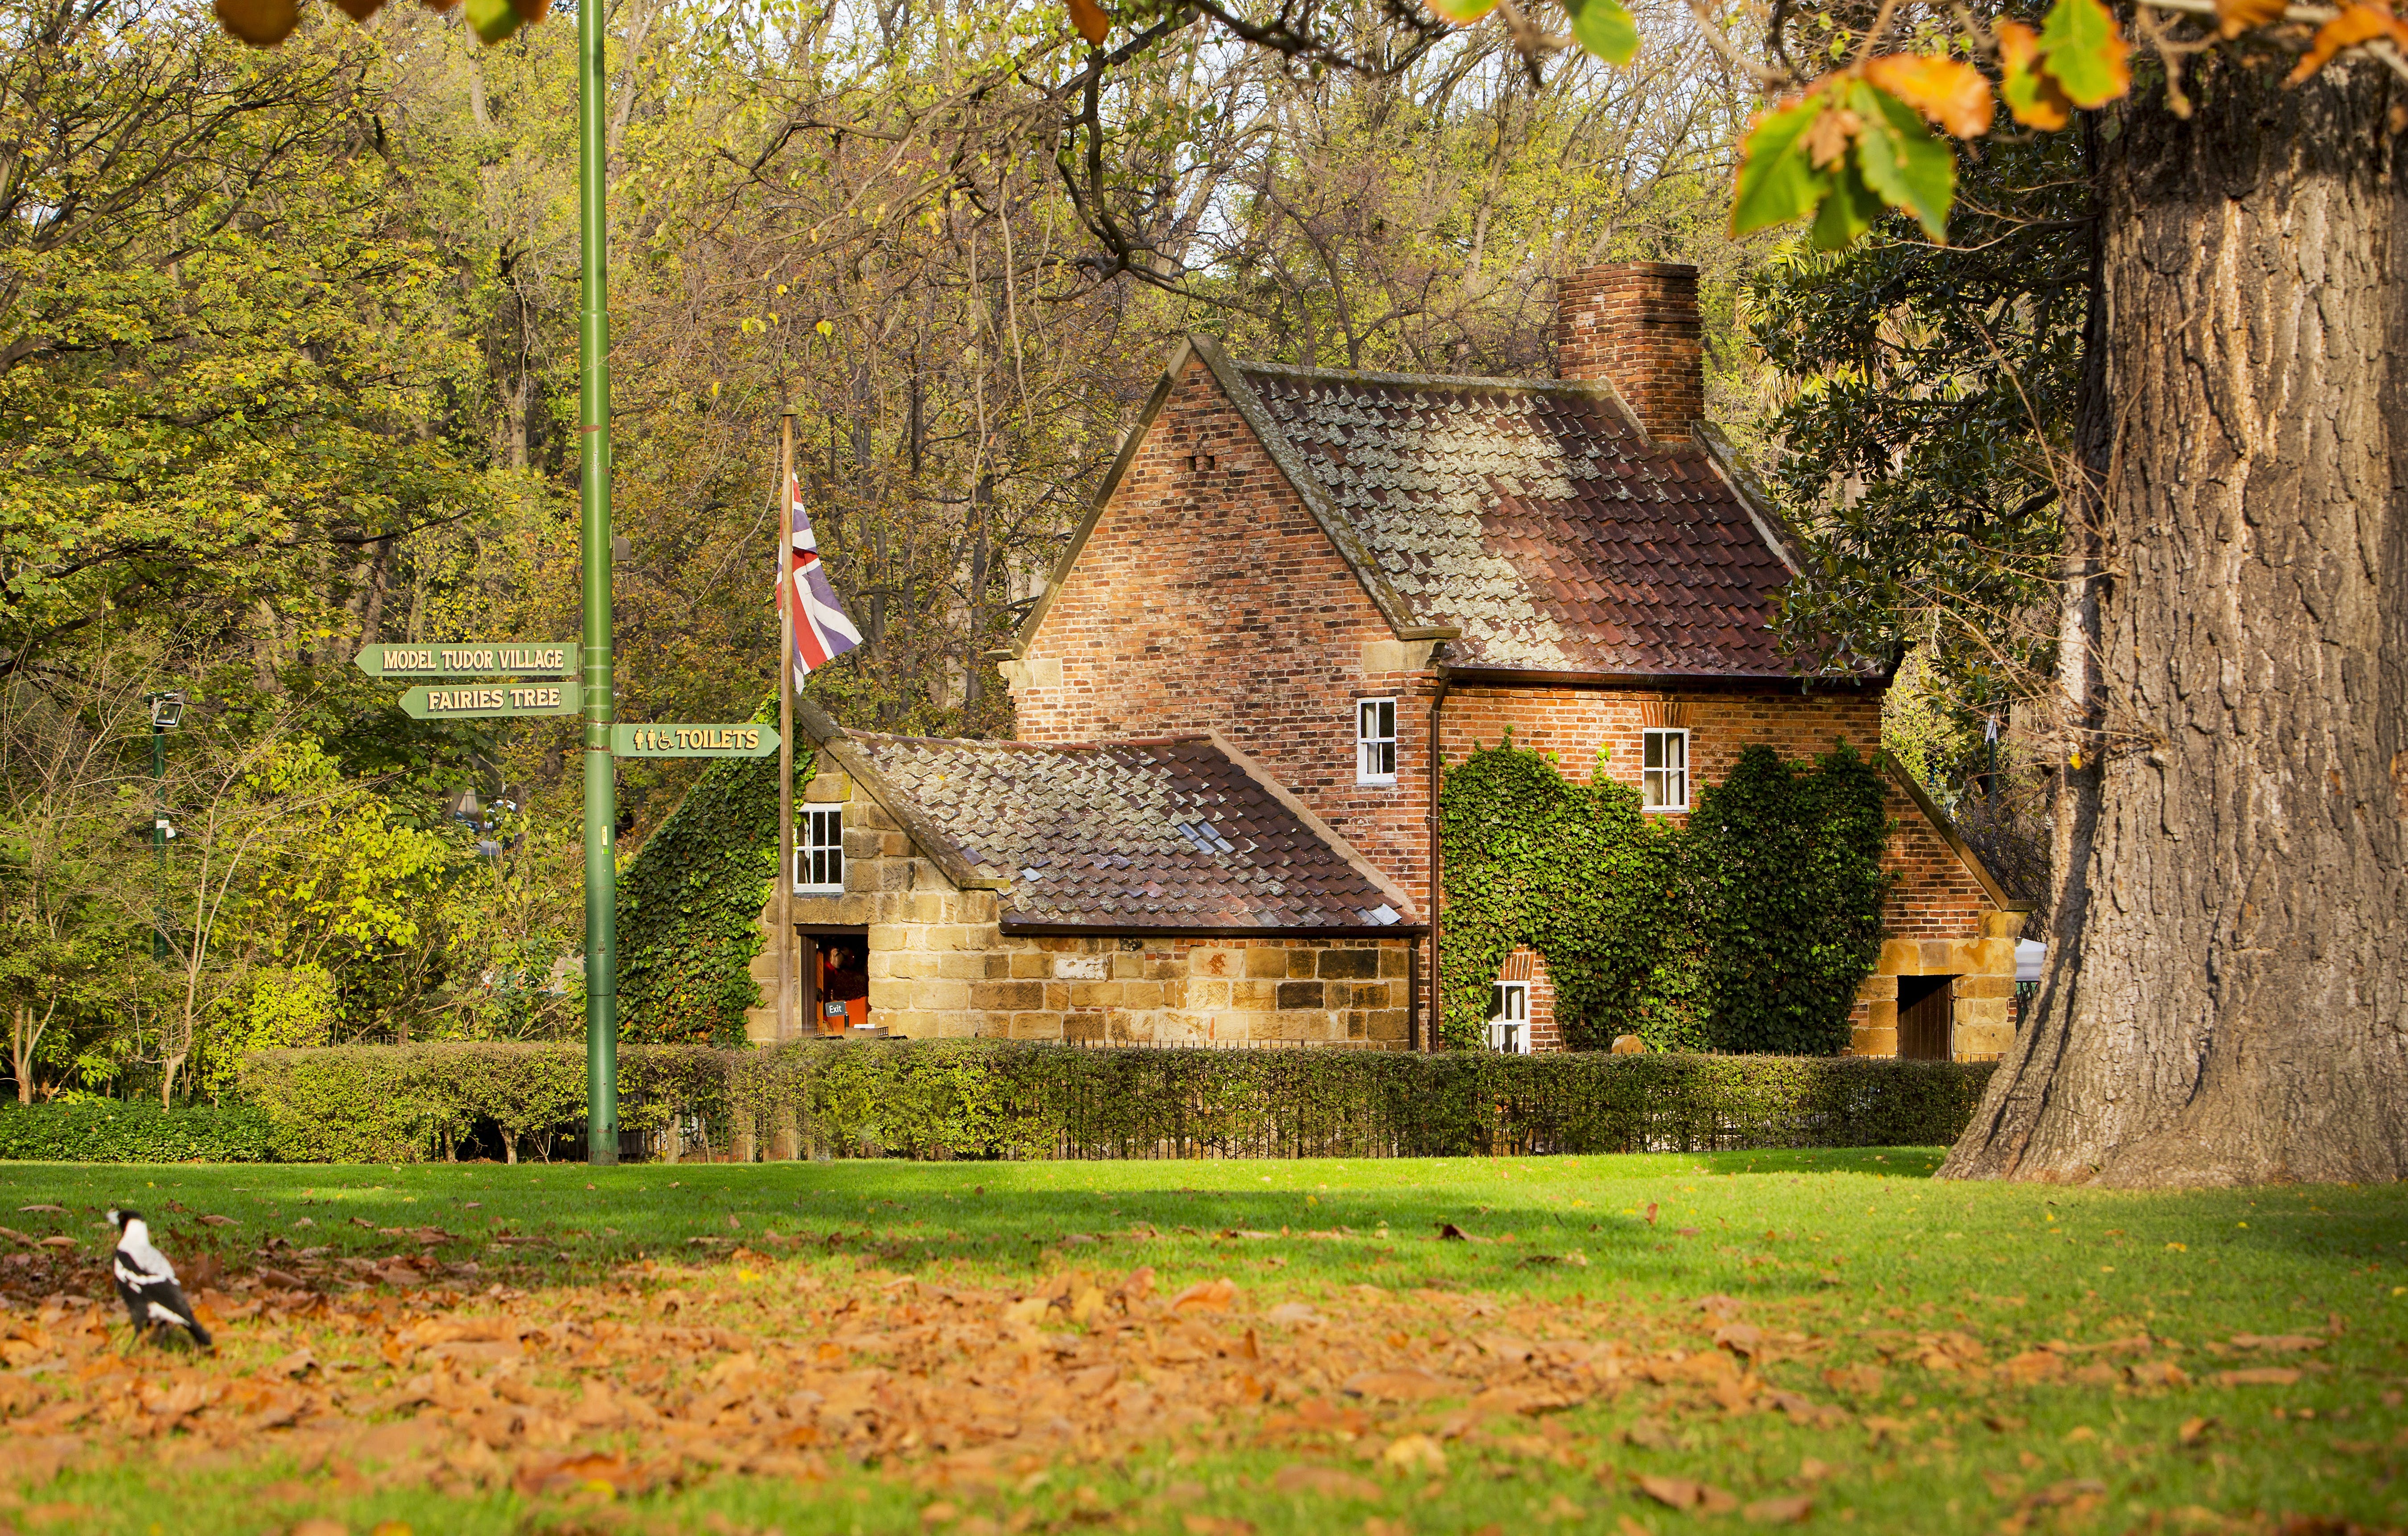 Cooks' Cottage - Find Attractions